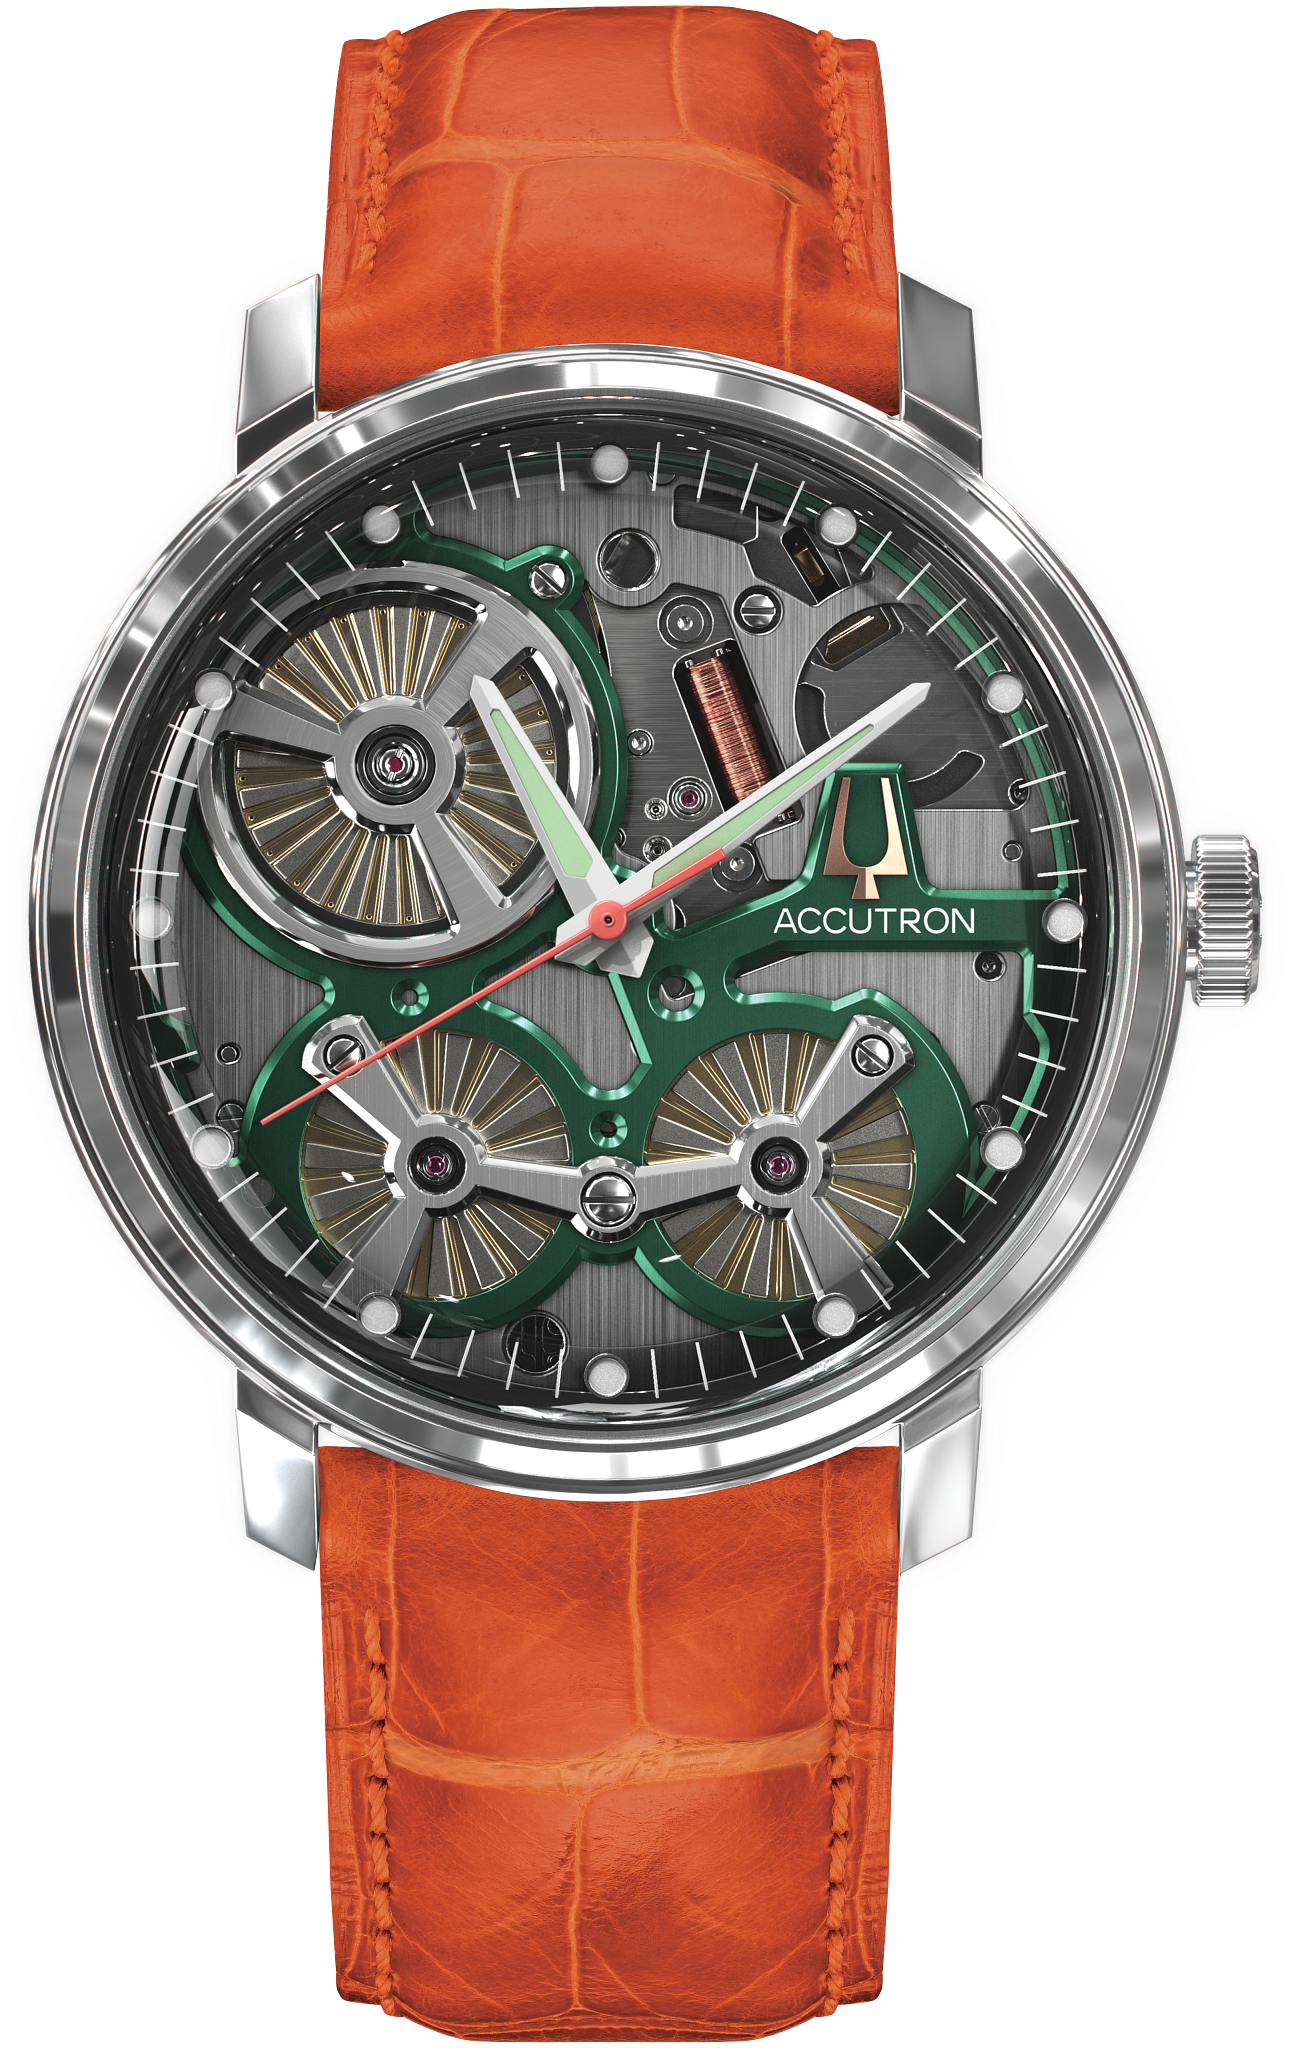 Inspired (and Worn) by Elvis: Accutron Presents the New, 1960-Inspired  Legacy 521 | WatchTime - USA's No.1 Watch Magazine